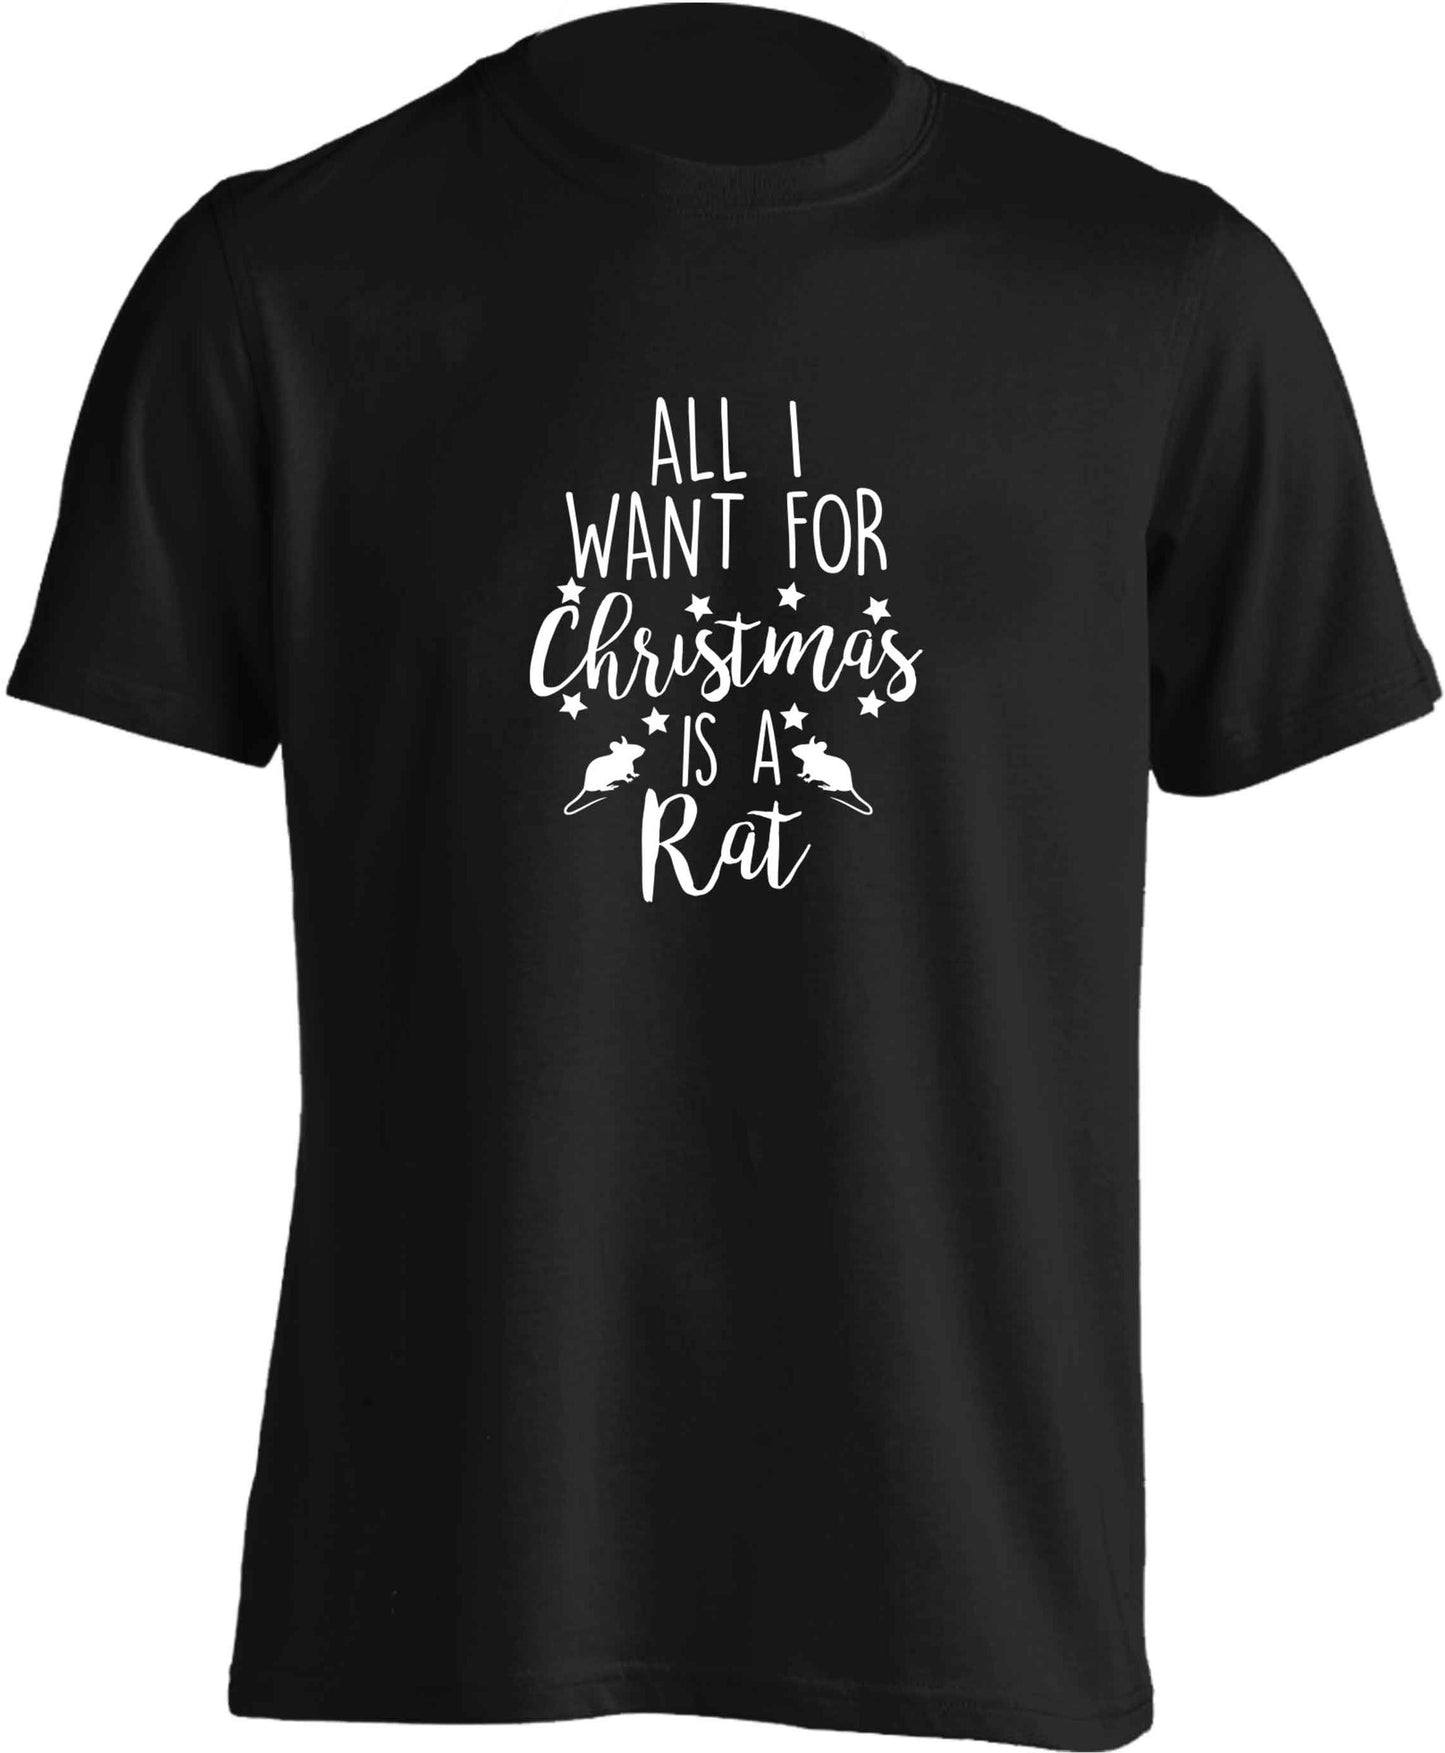 All I want for Christmas is a rat adults unisex black Tshirt 2XL